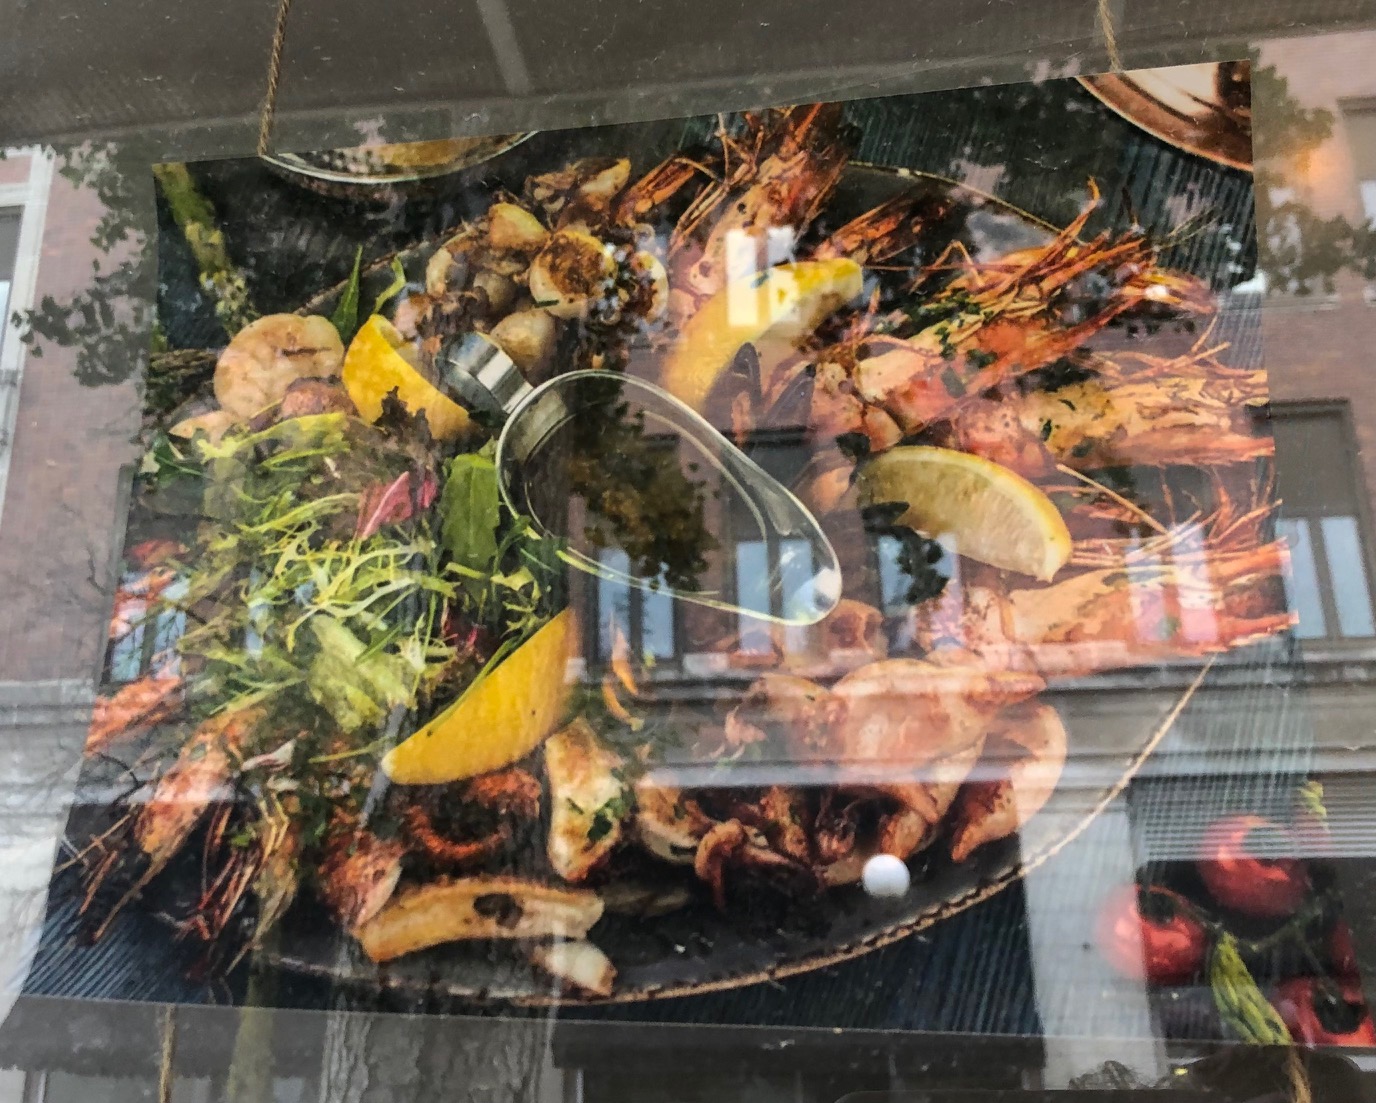 In a color print out of a photo taped to the inside of a window, there is a black bowl of seafood and shellfish with lemon wedges and herbs. Photo by Alyssa Buckley.